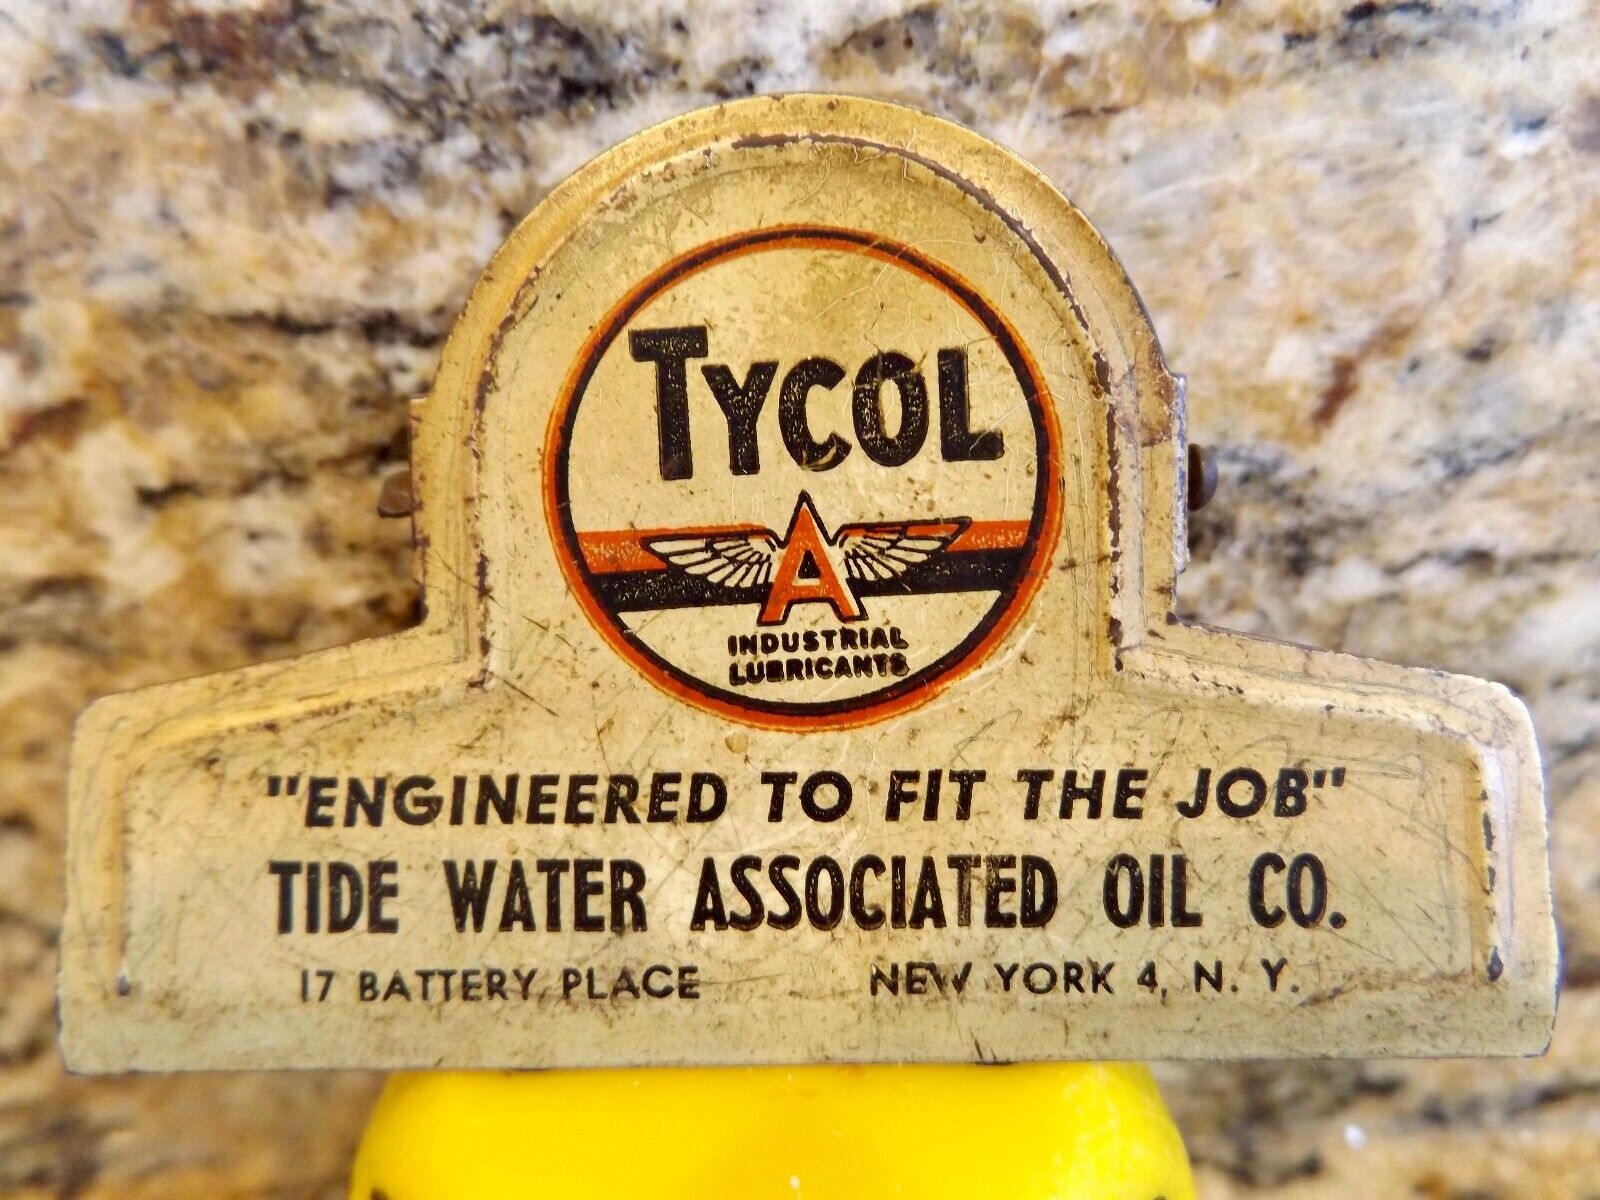 Vintage Tycol" Flying A " Industrial Lubricants Advertising Receipt Clip Gas Oil